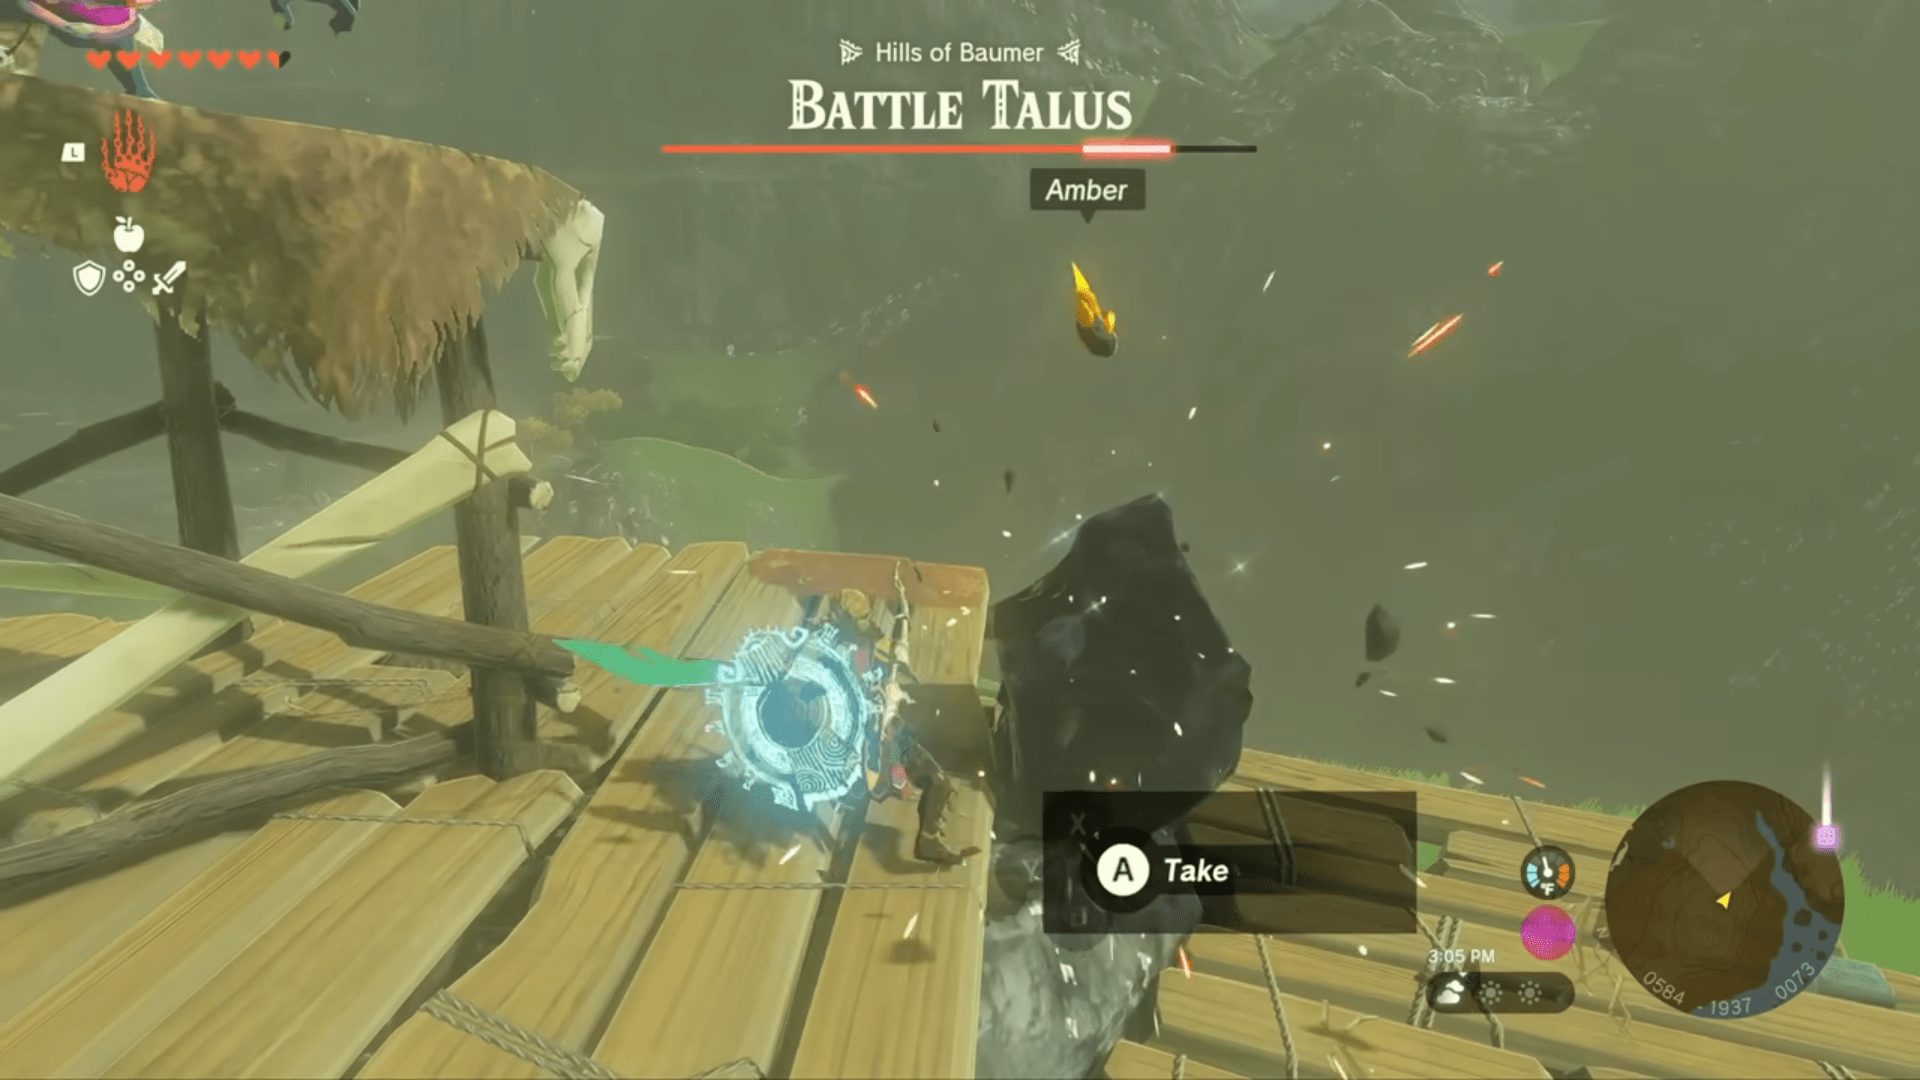 Link using his Master Sword on a Battle Talus